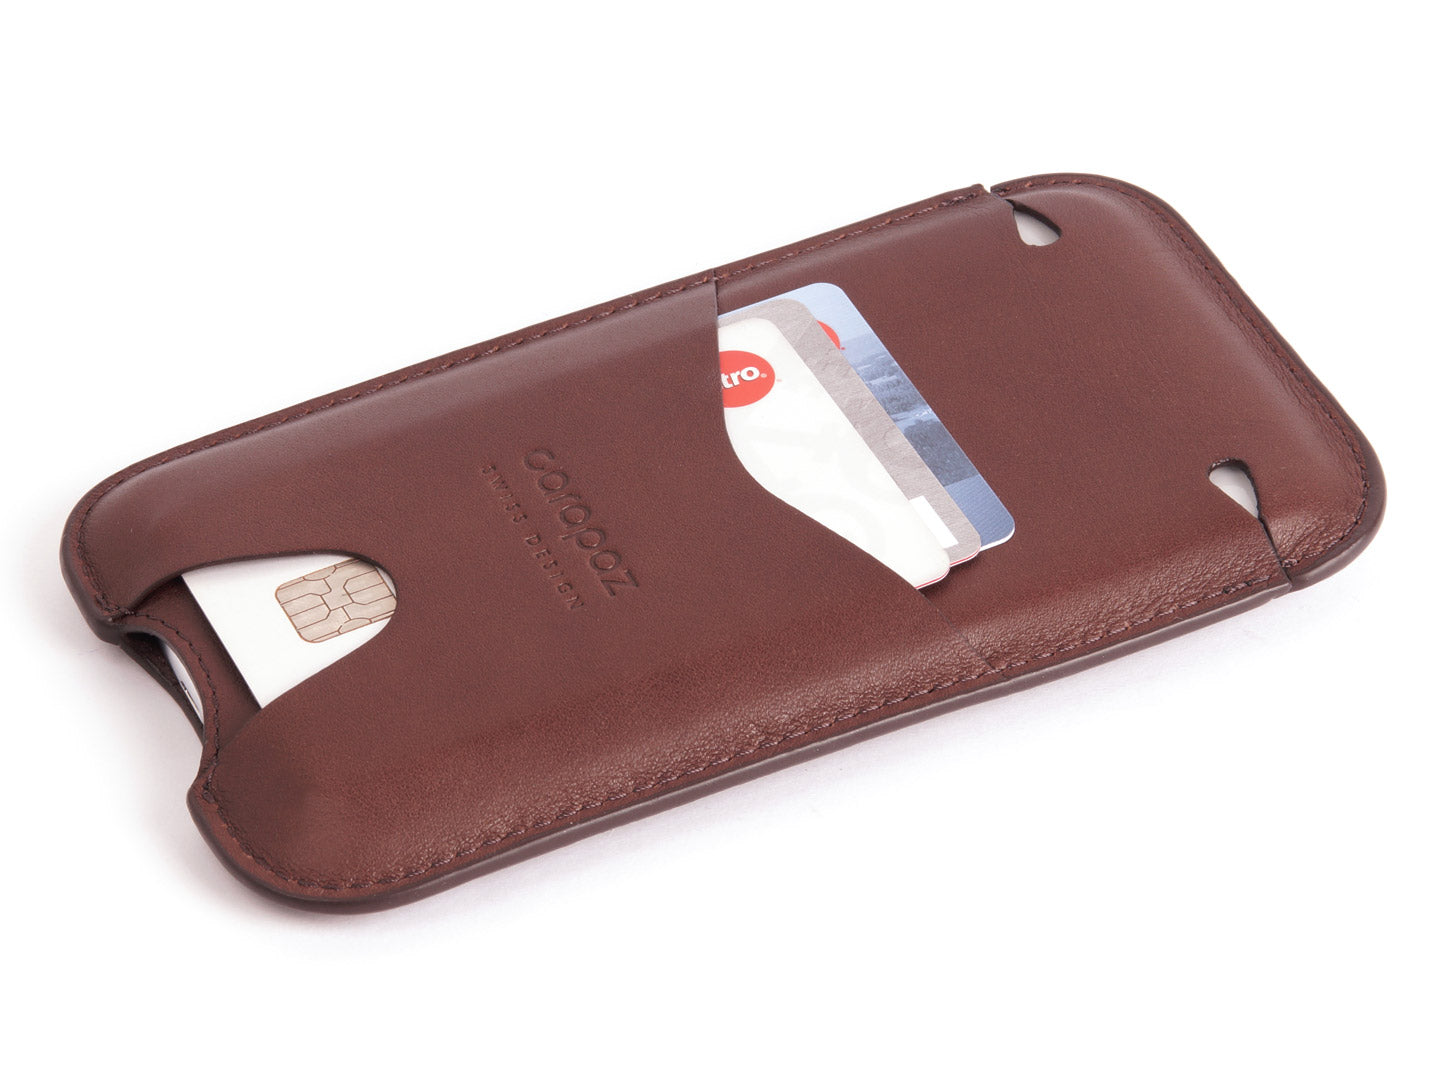 iPhone X / Xs / 11 Pro Leather Pouch - Protective Sleeve Case - Brown Natural Leather - rear cards - Carapaz